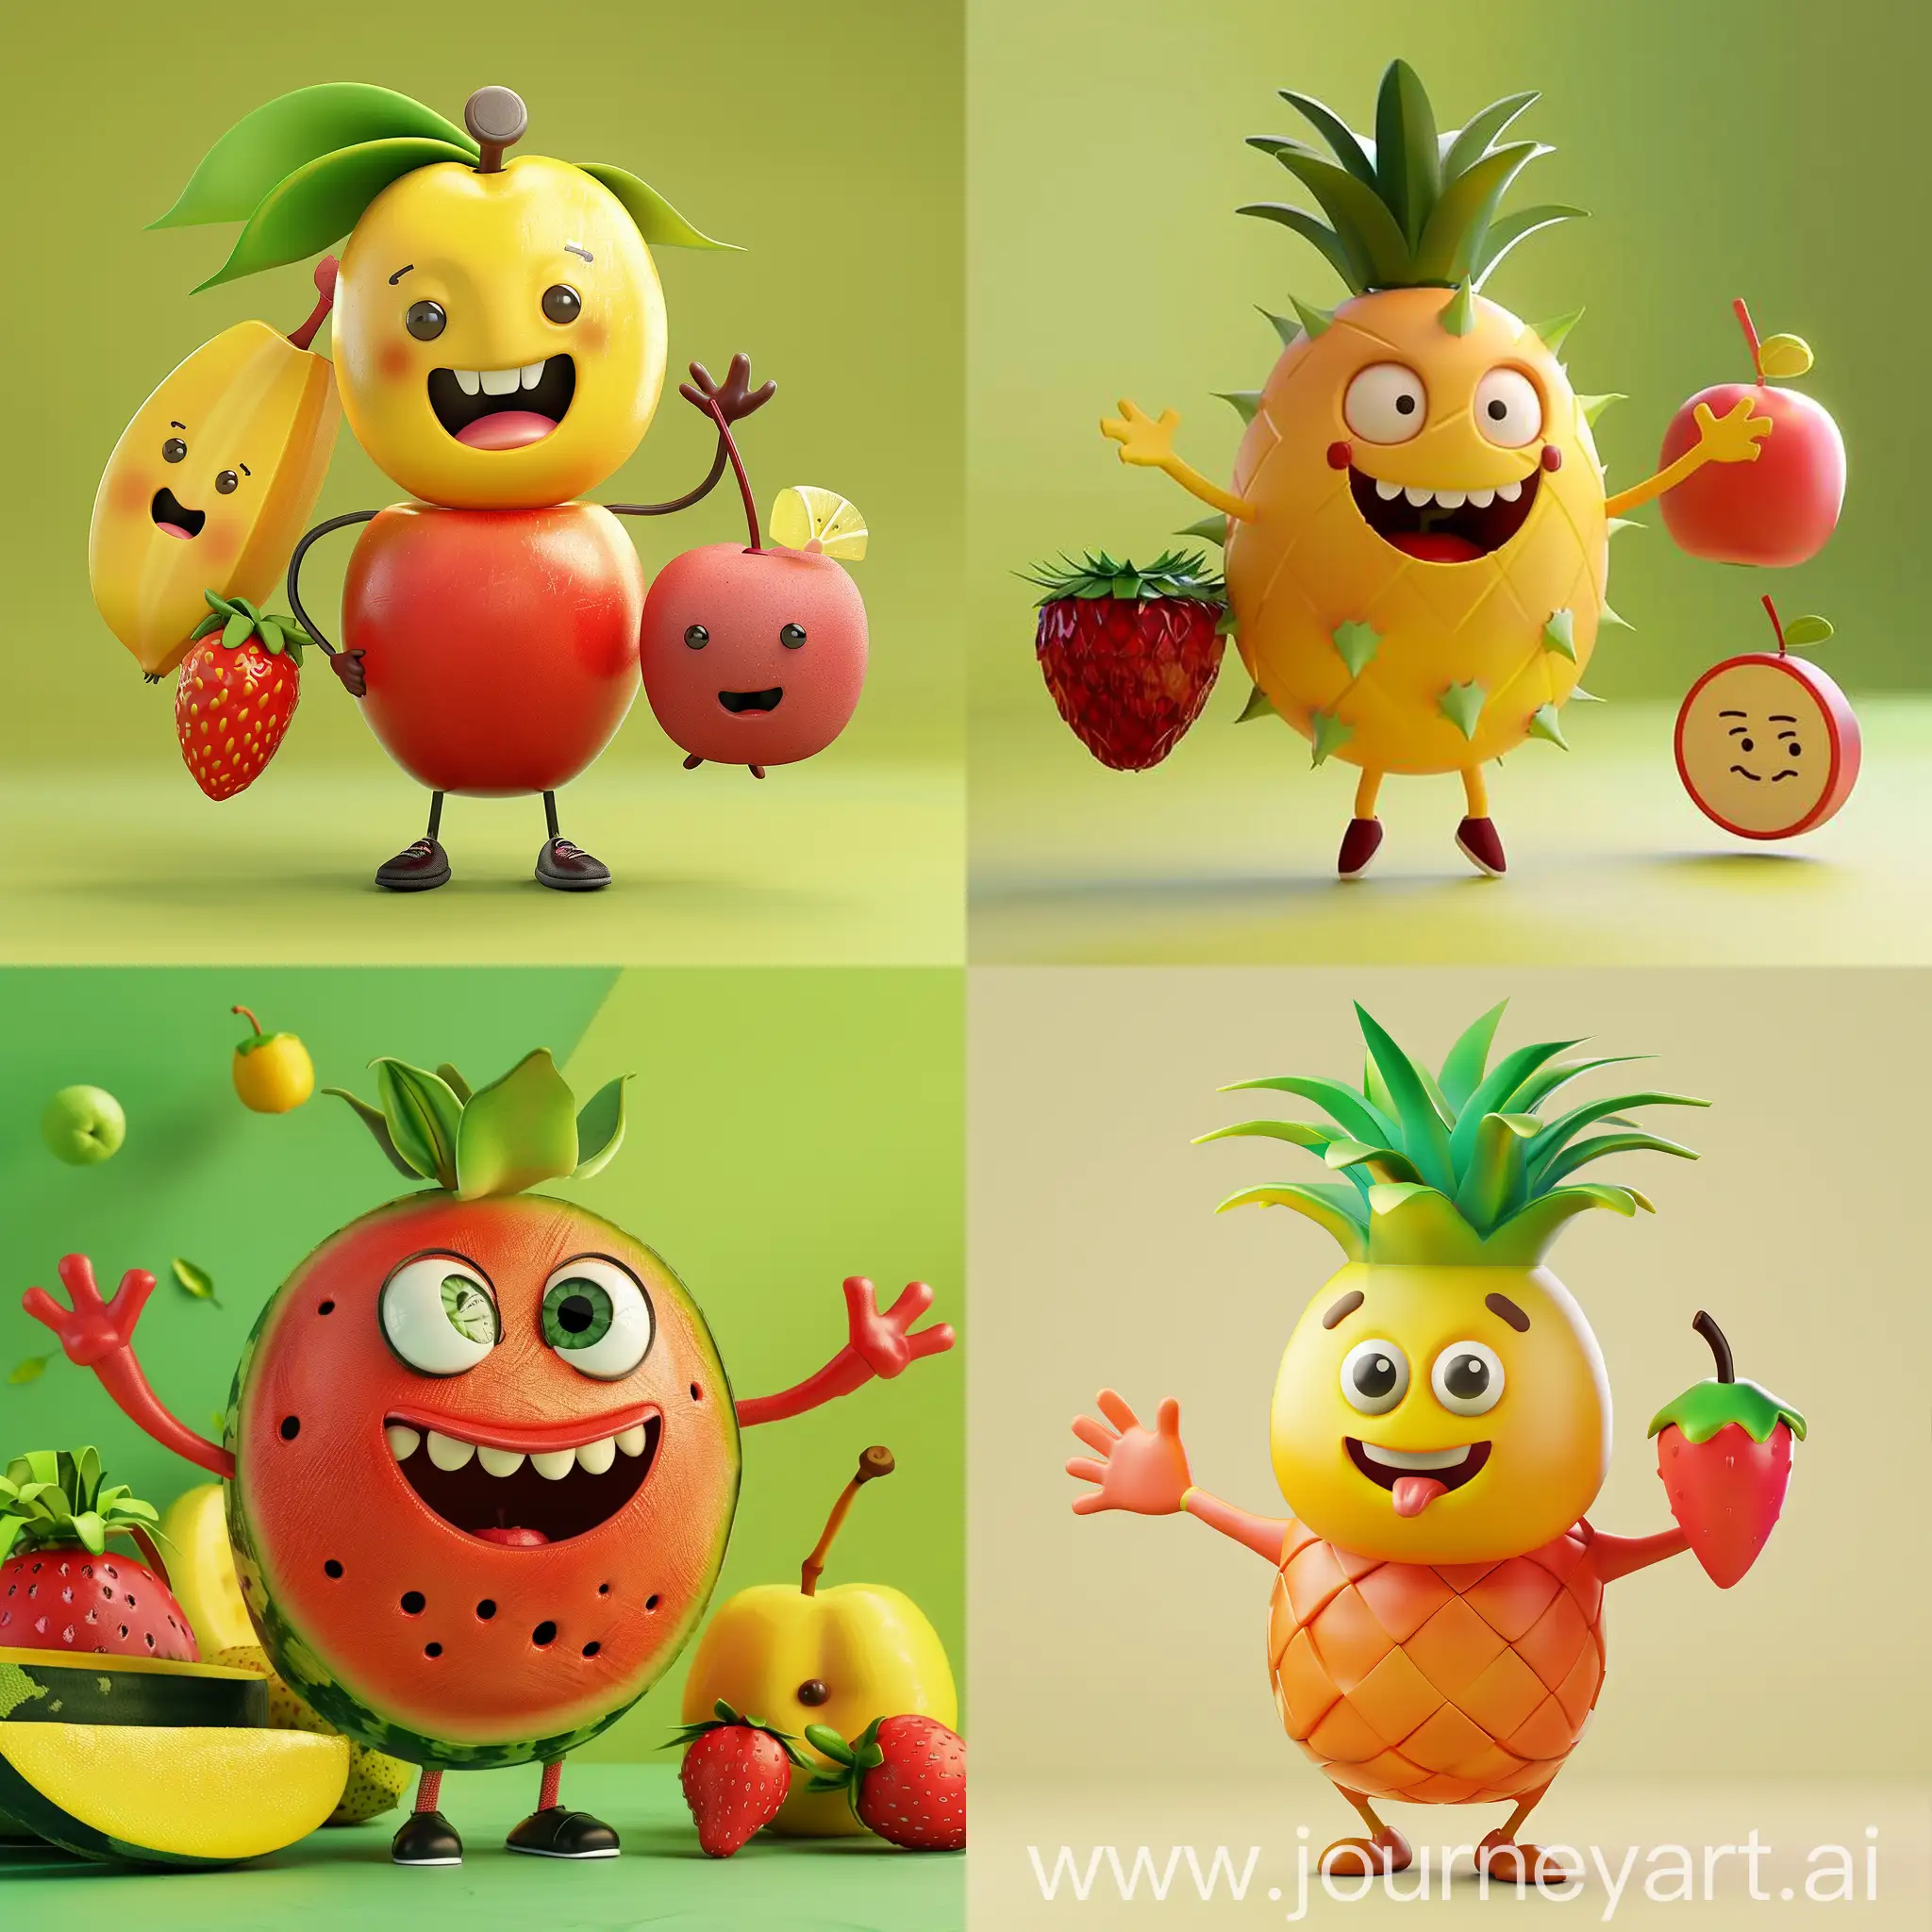 Cheerful-Animated-Fruit-Character-in-Cartoon-Style